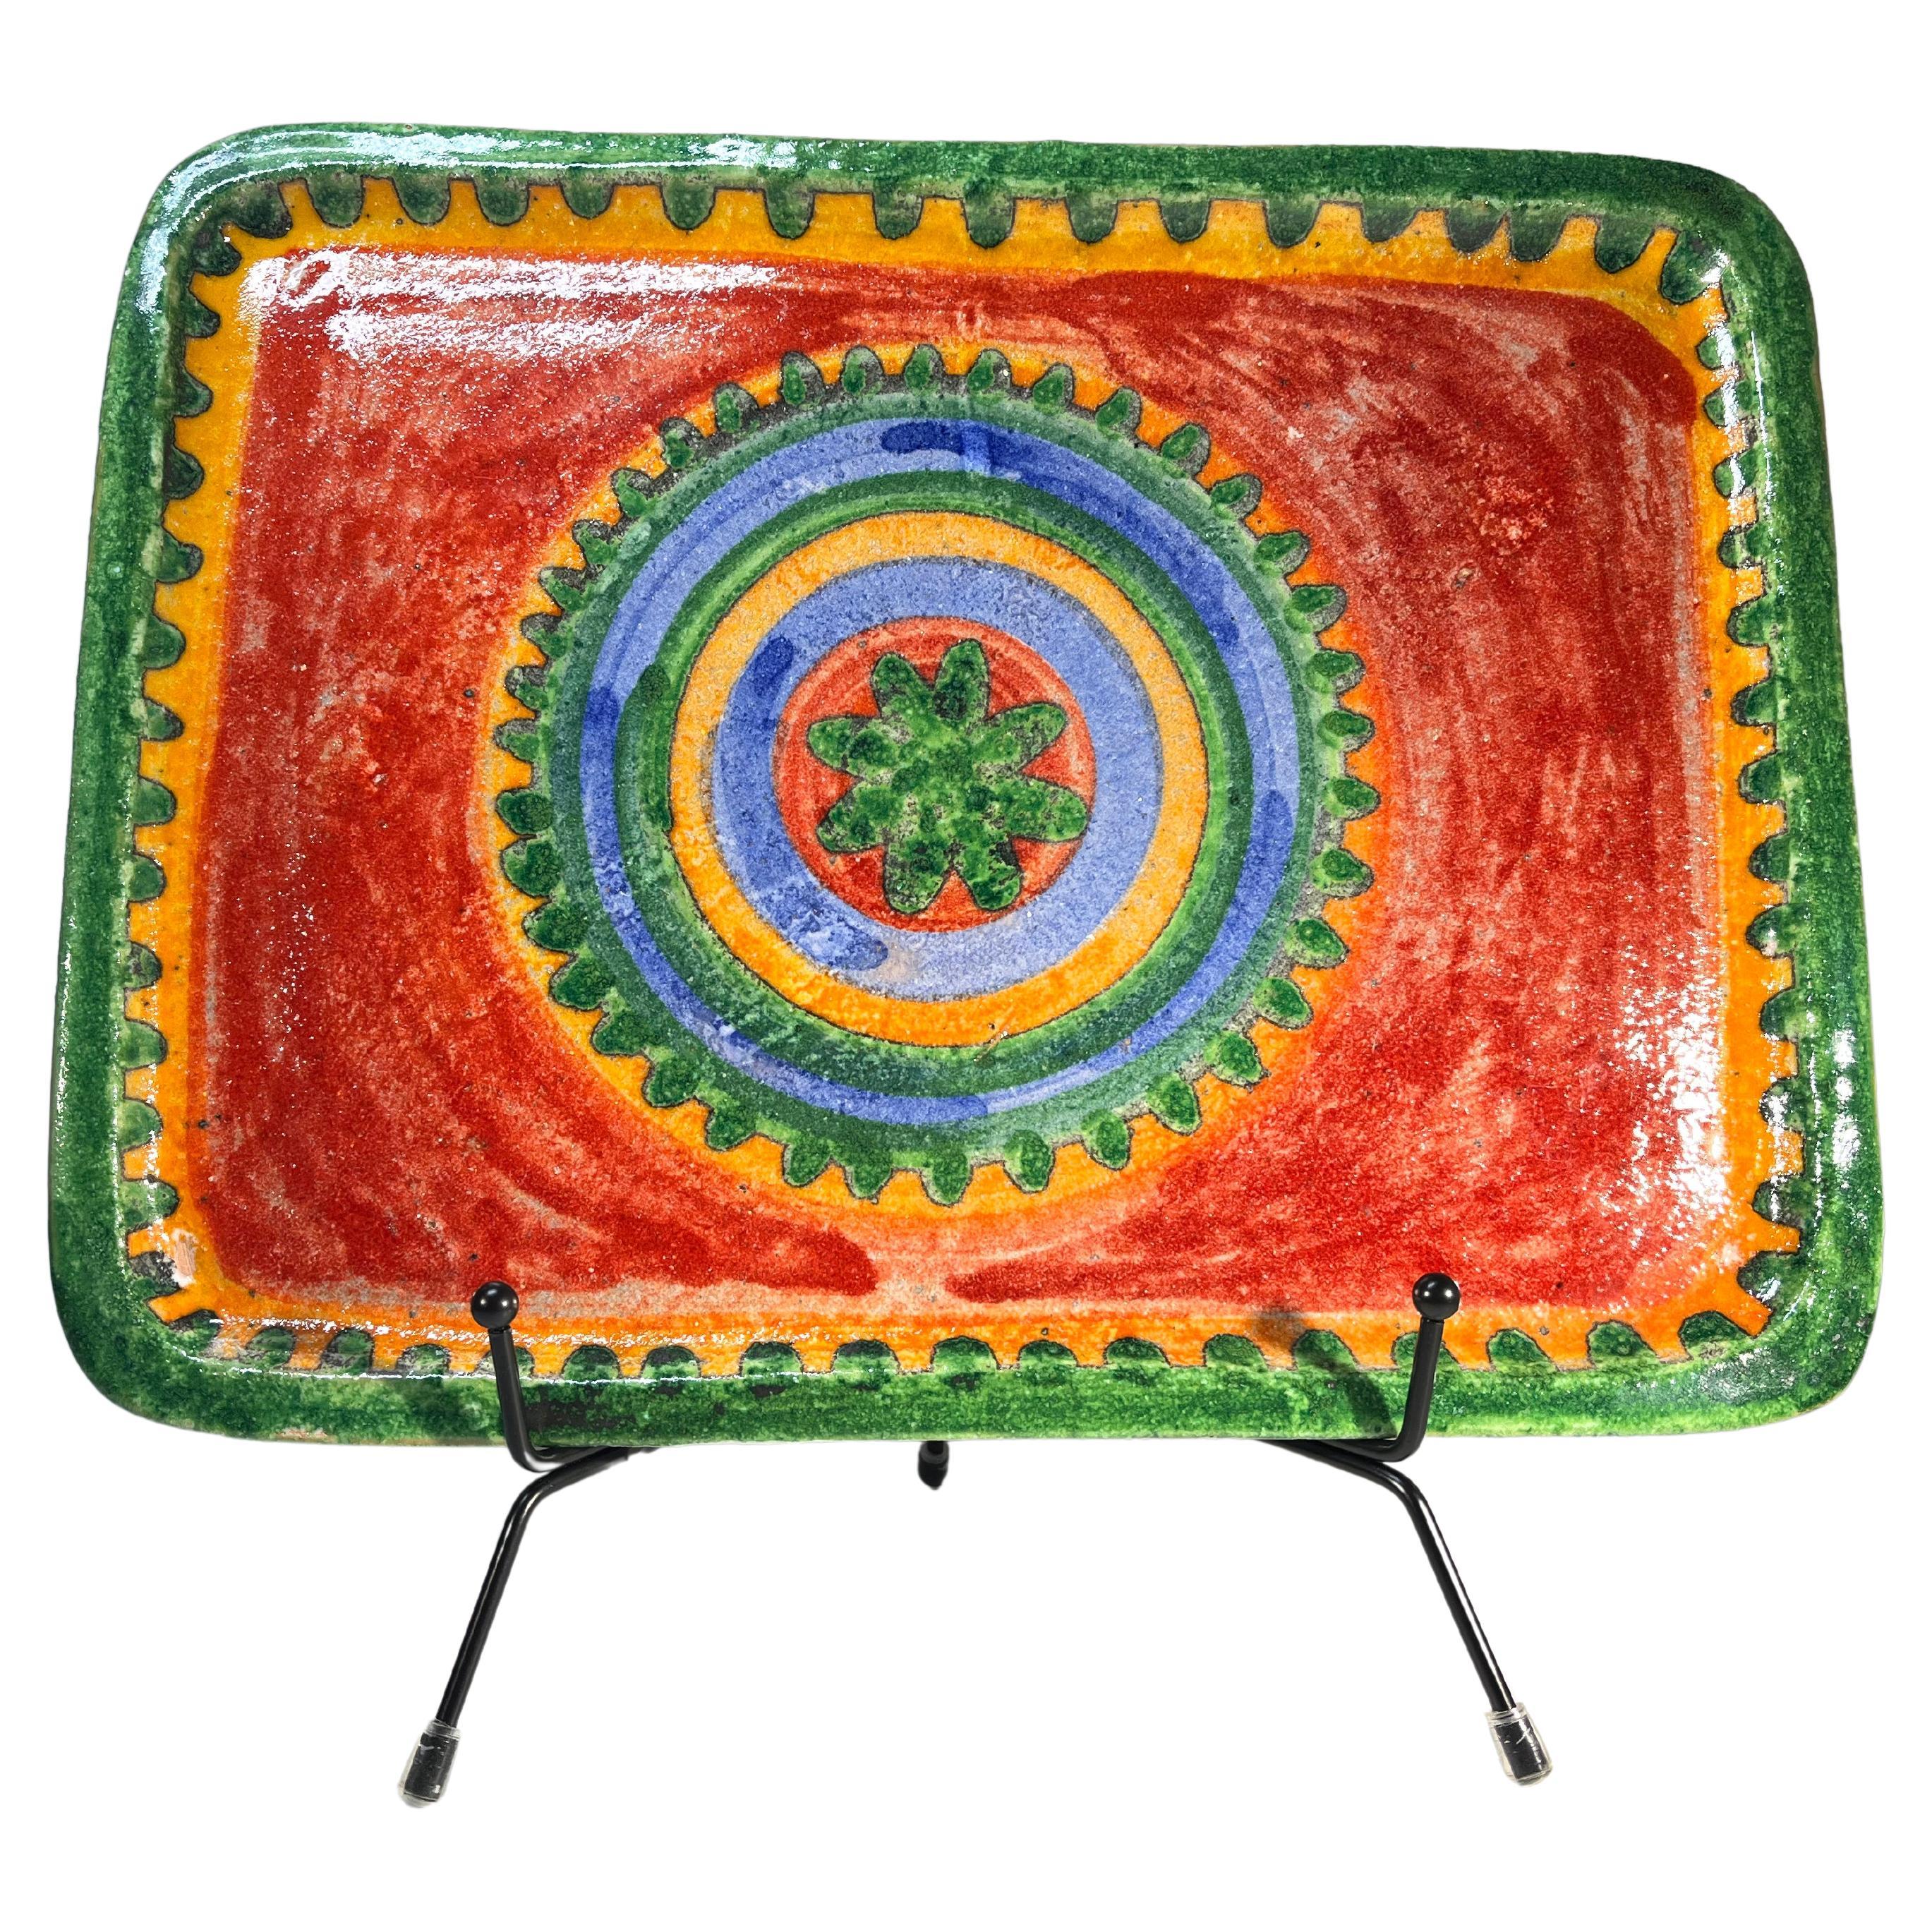 Colours Of The Mediterranean, Glazed Ceramic Platter By DeSimone, Italy, c1960 For Sale